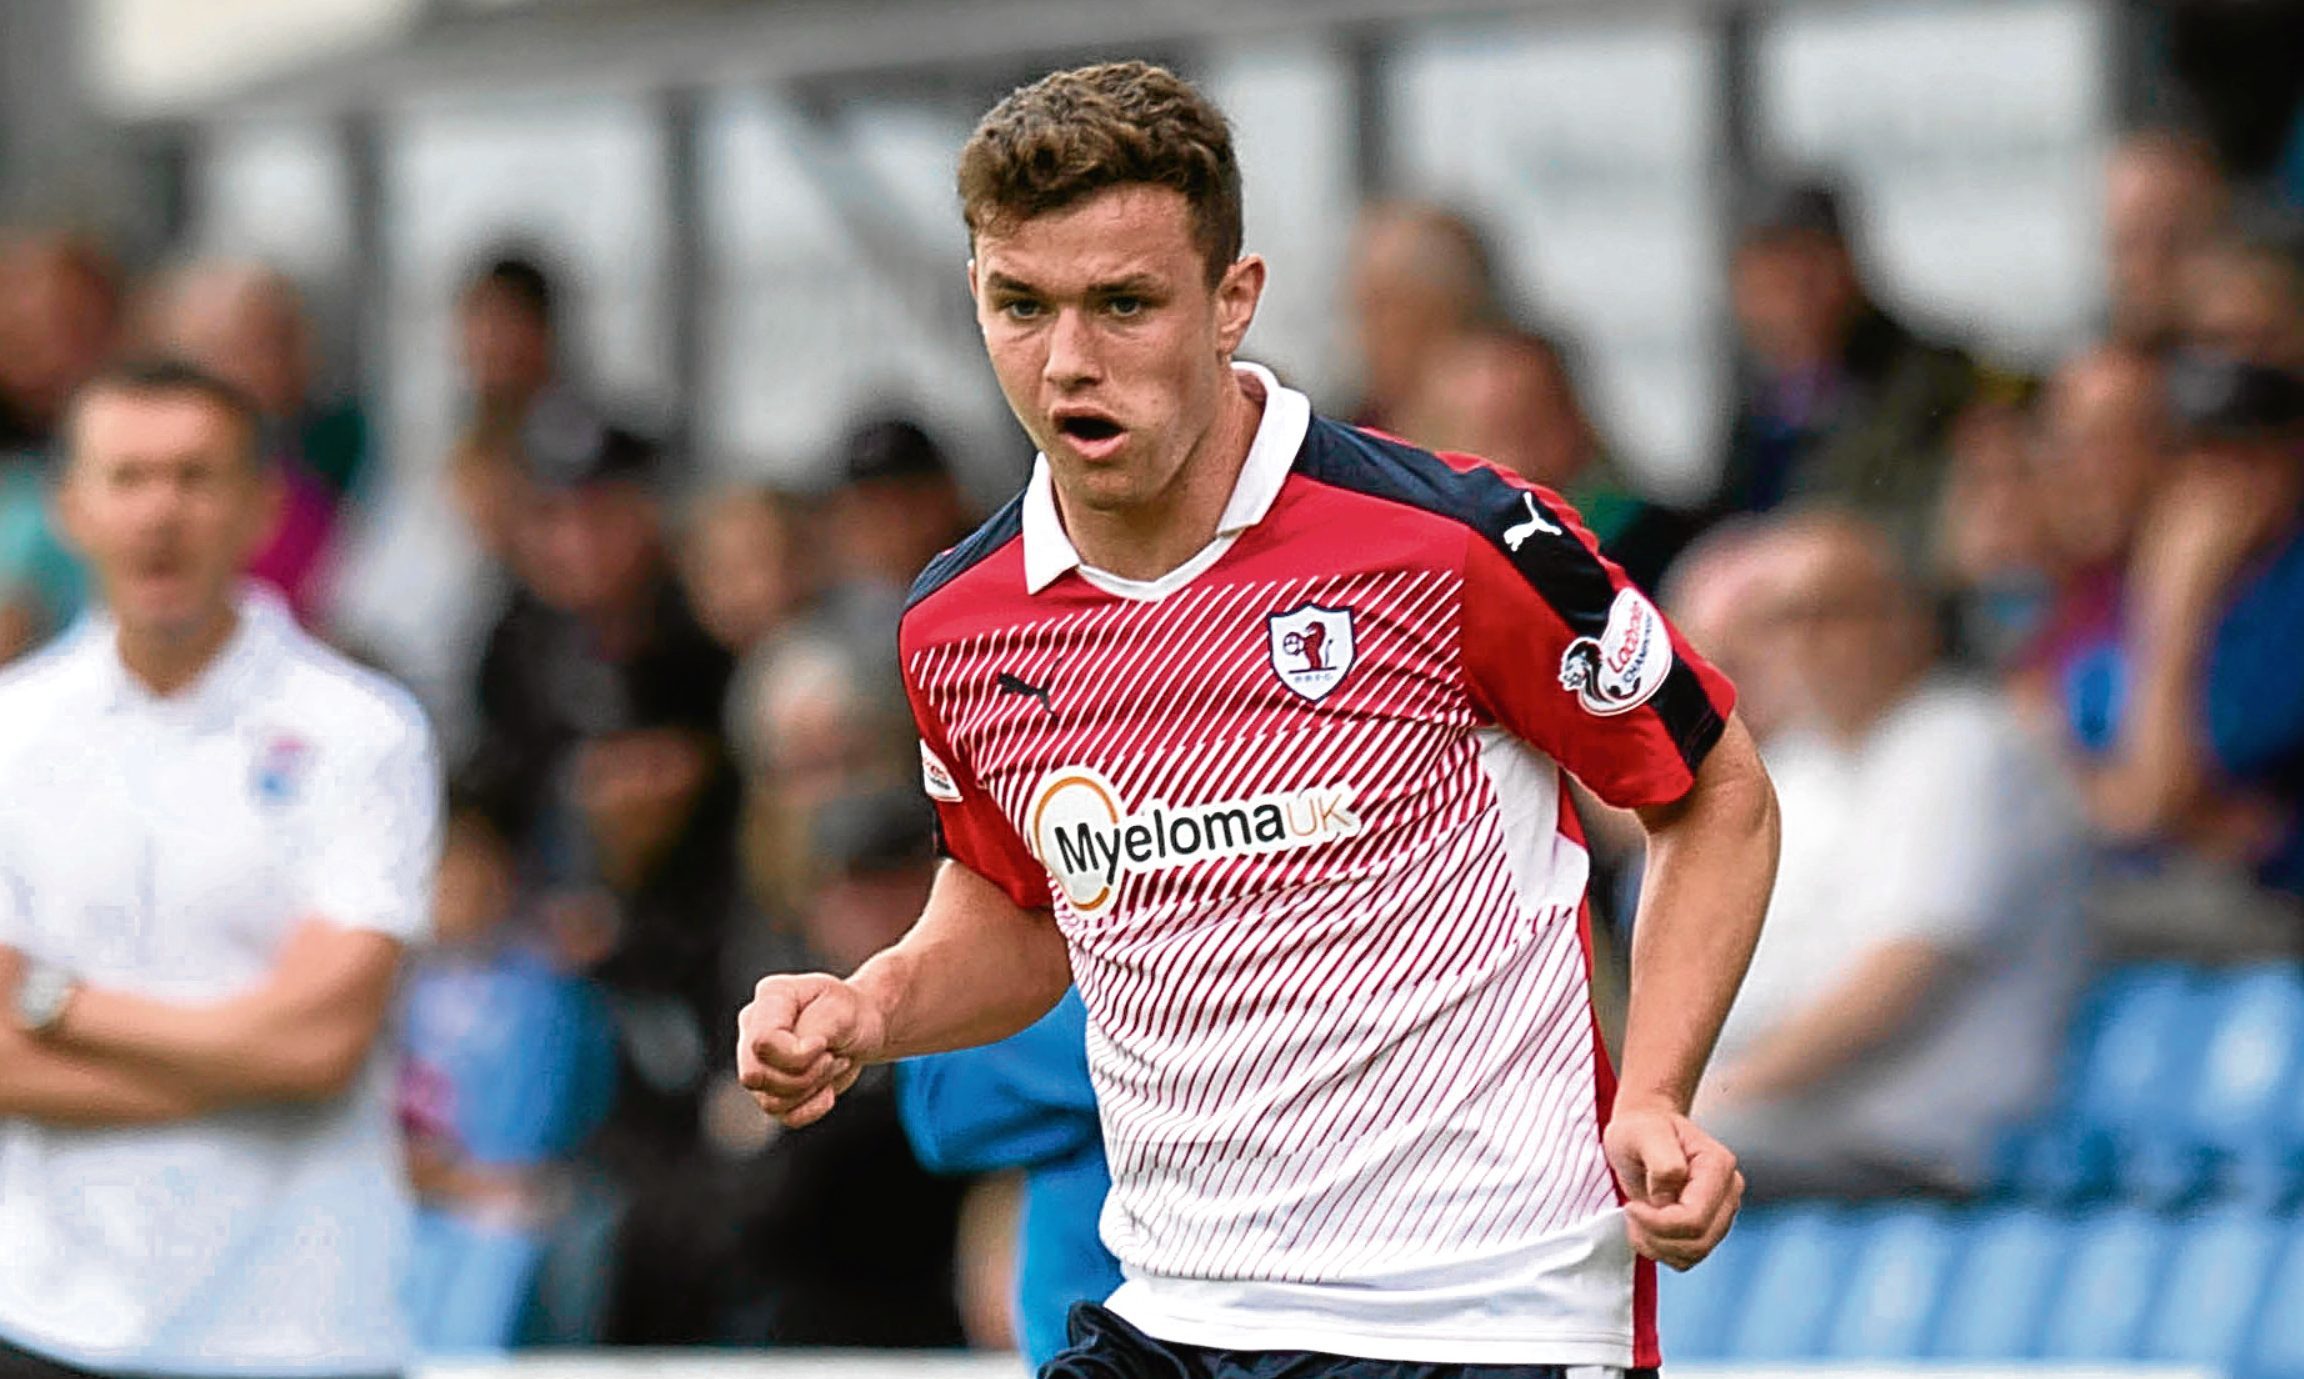 Ross Matthews in action for Raith Rovers.